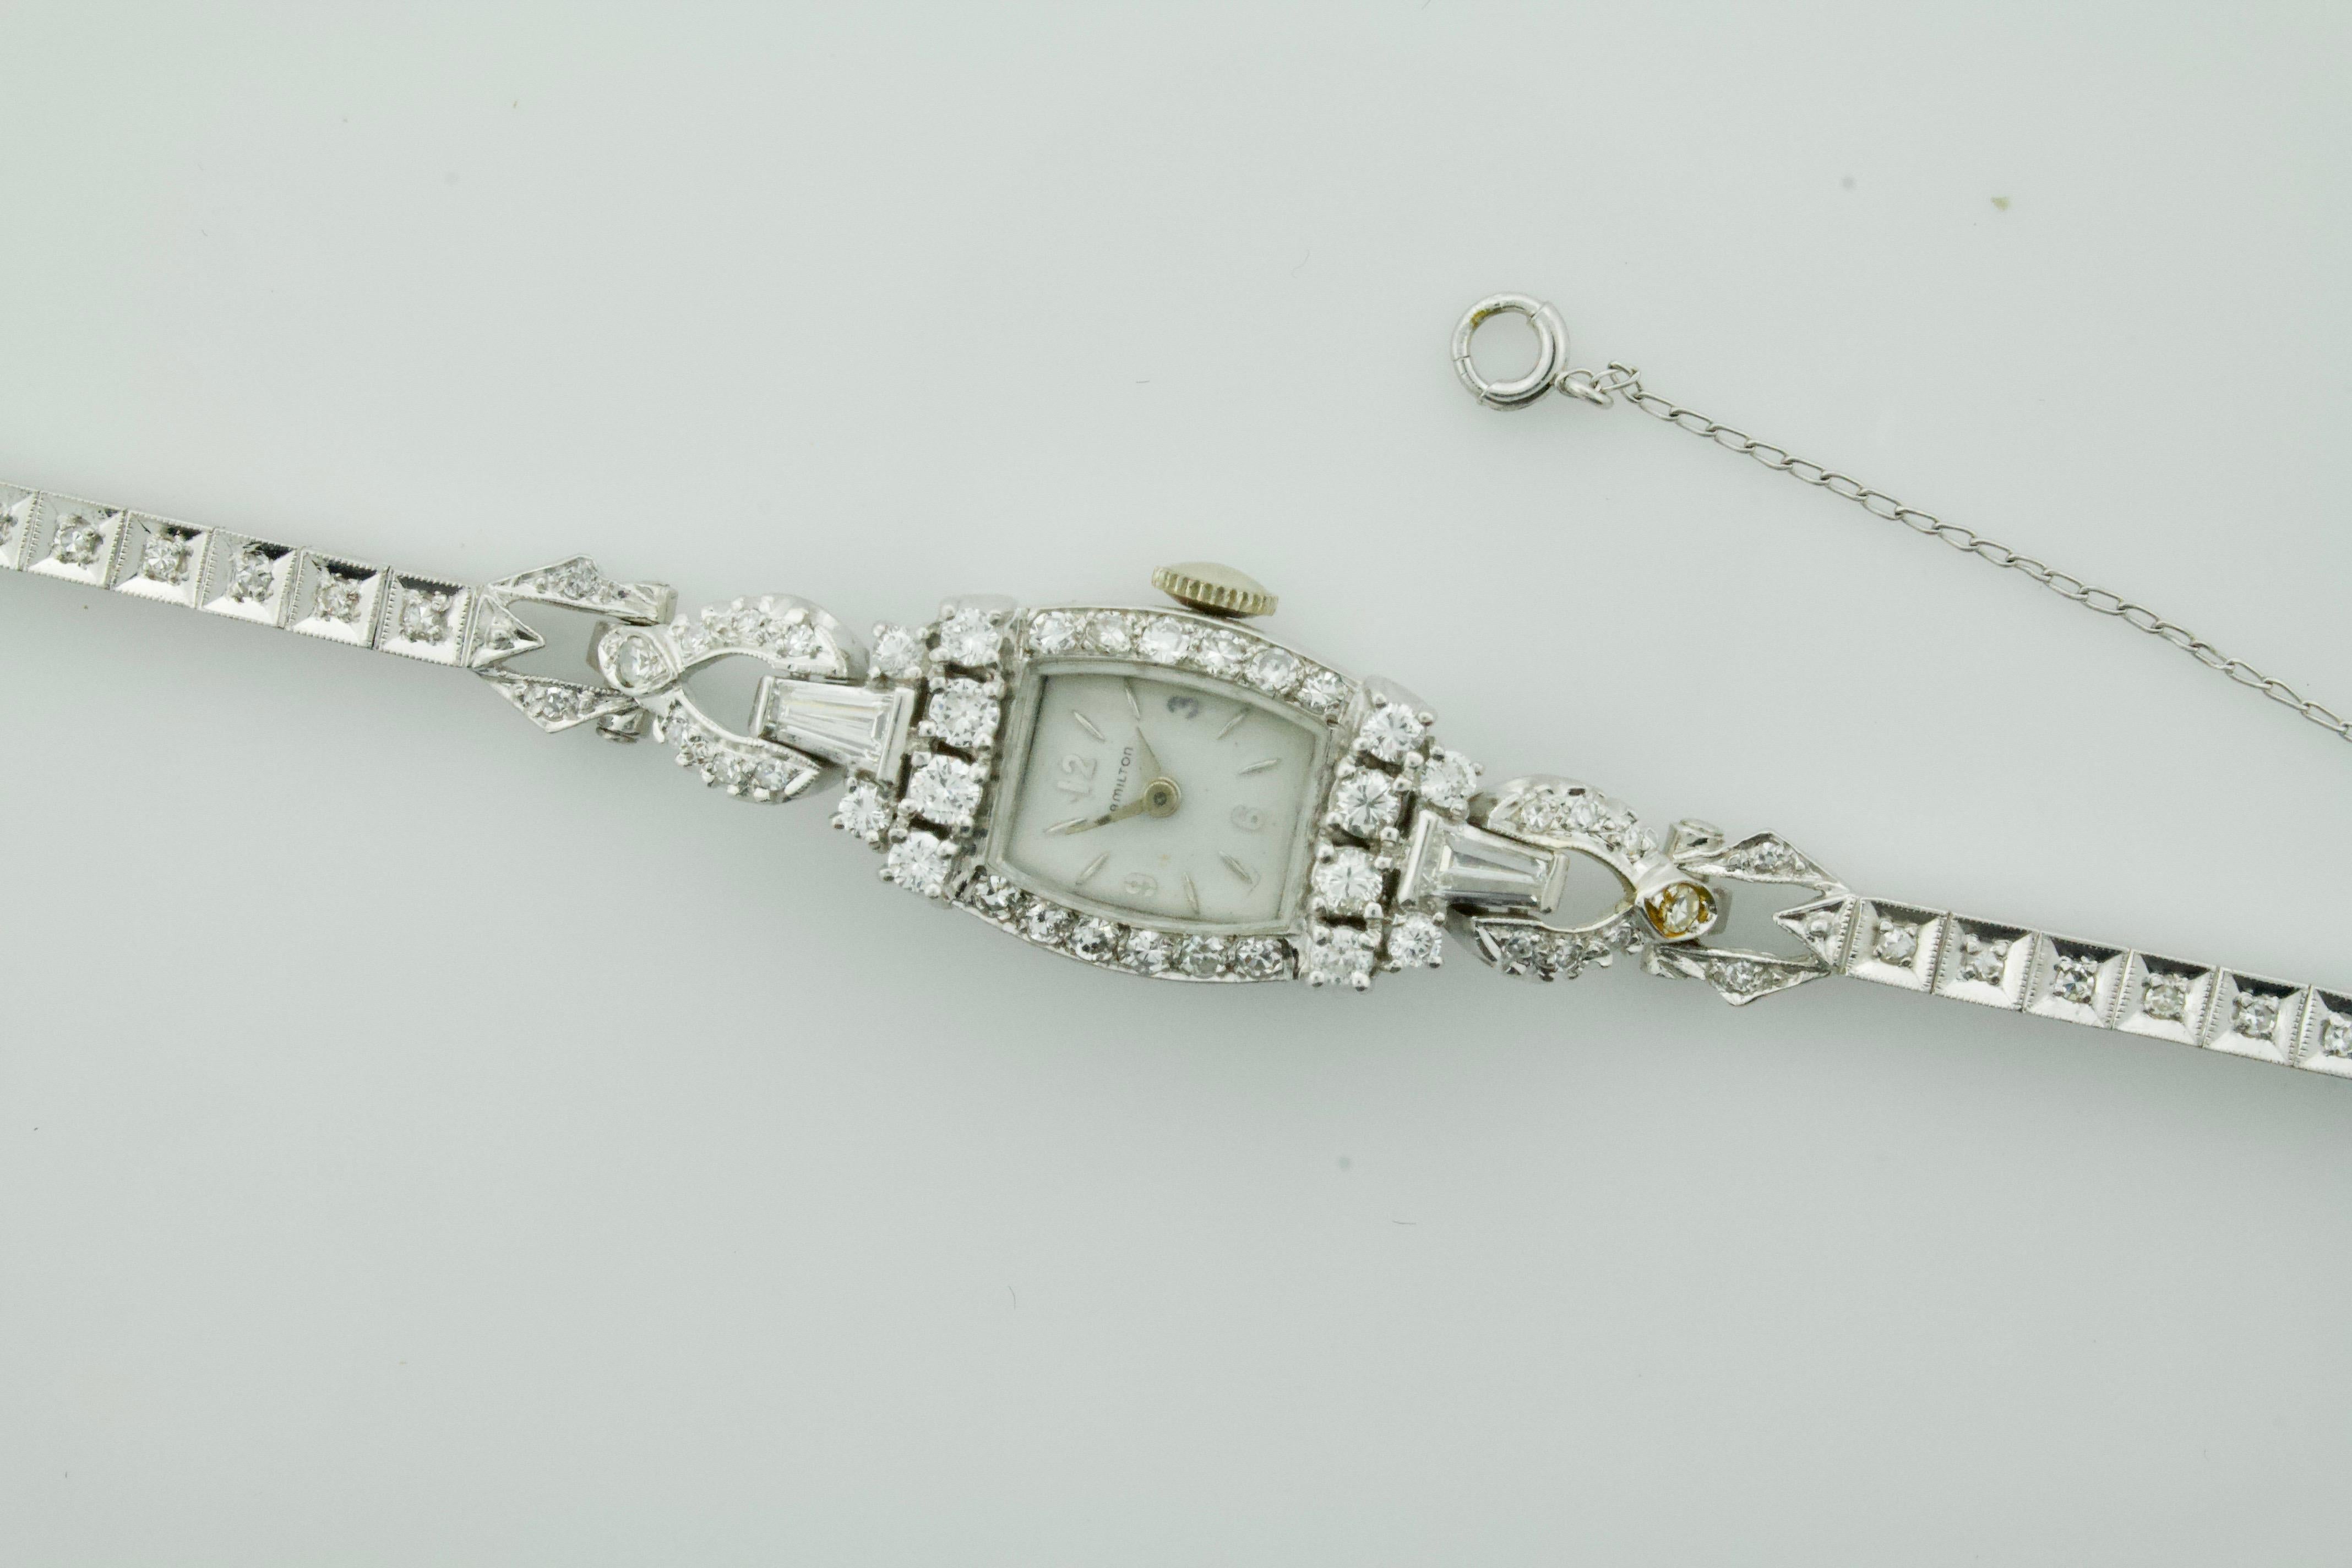 Hamilton Platinum Diamond Watch circa 1930's 1.55 carats
Two Tapered Baguette Cut Diamonds weighing .50 carats approximately
Twelve Round Brilliant Cut Diamonds weighing .55 carats approximately
Fifty Nine Round Cut Diamonds weighing .50 carats